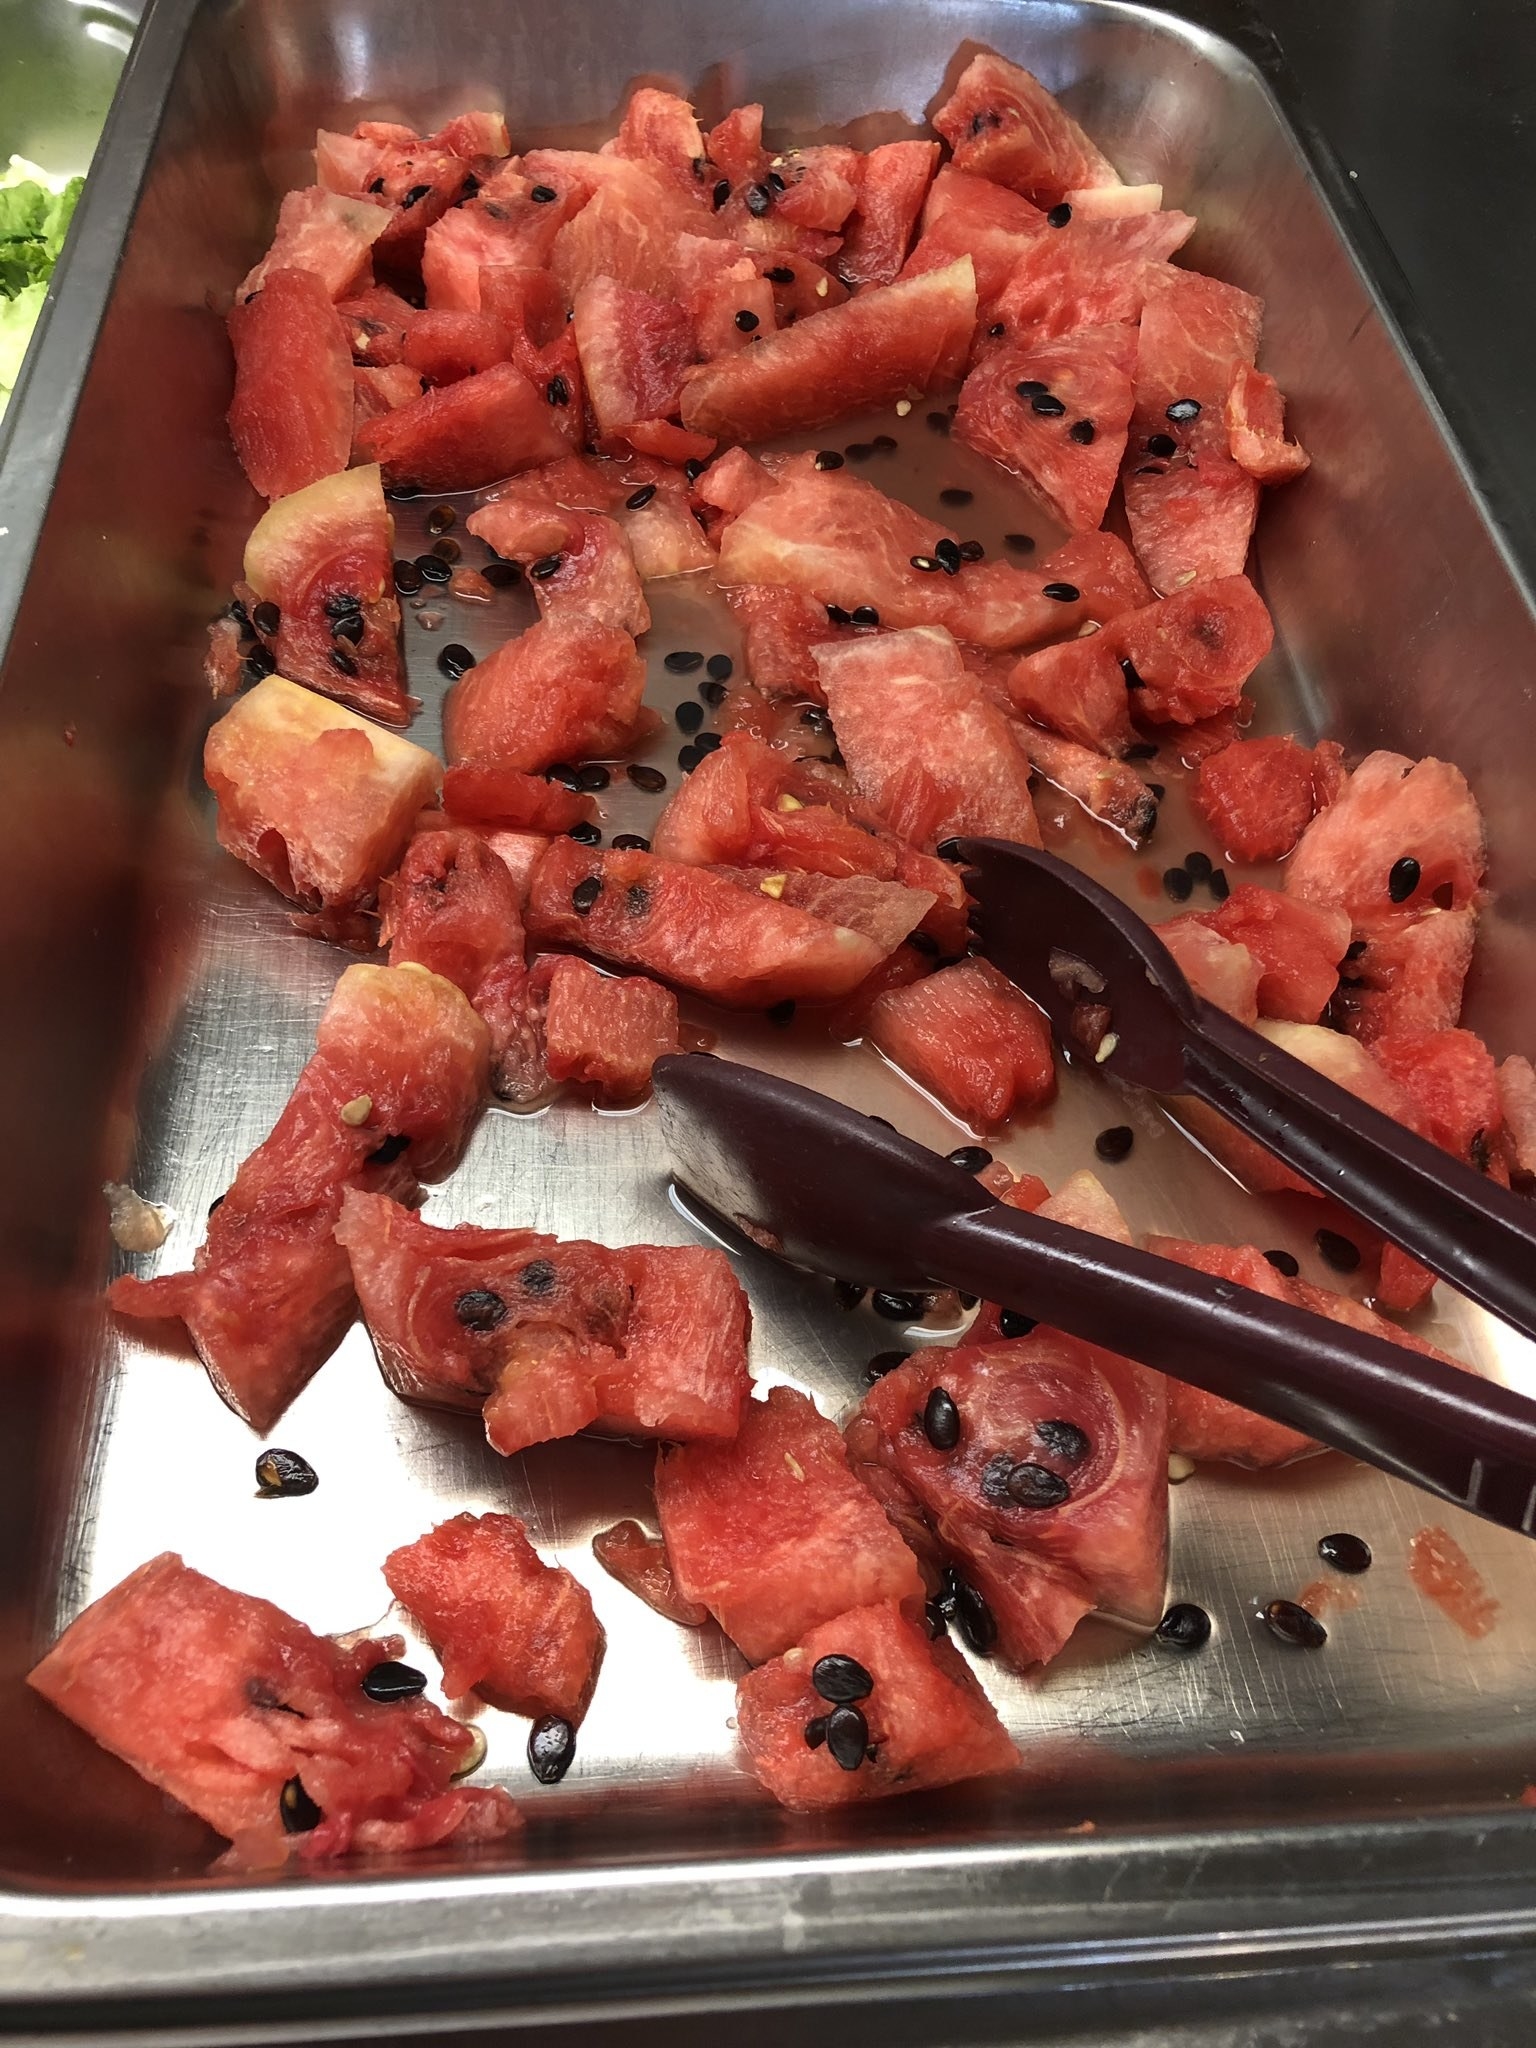 A stainless steel tray filled with chunks of watermelon and scattered black seeds. Red tongs are placed within the tray for serving